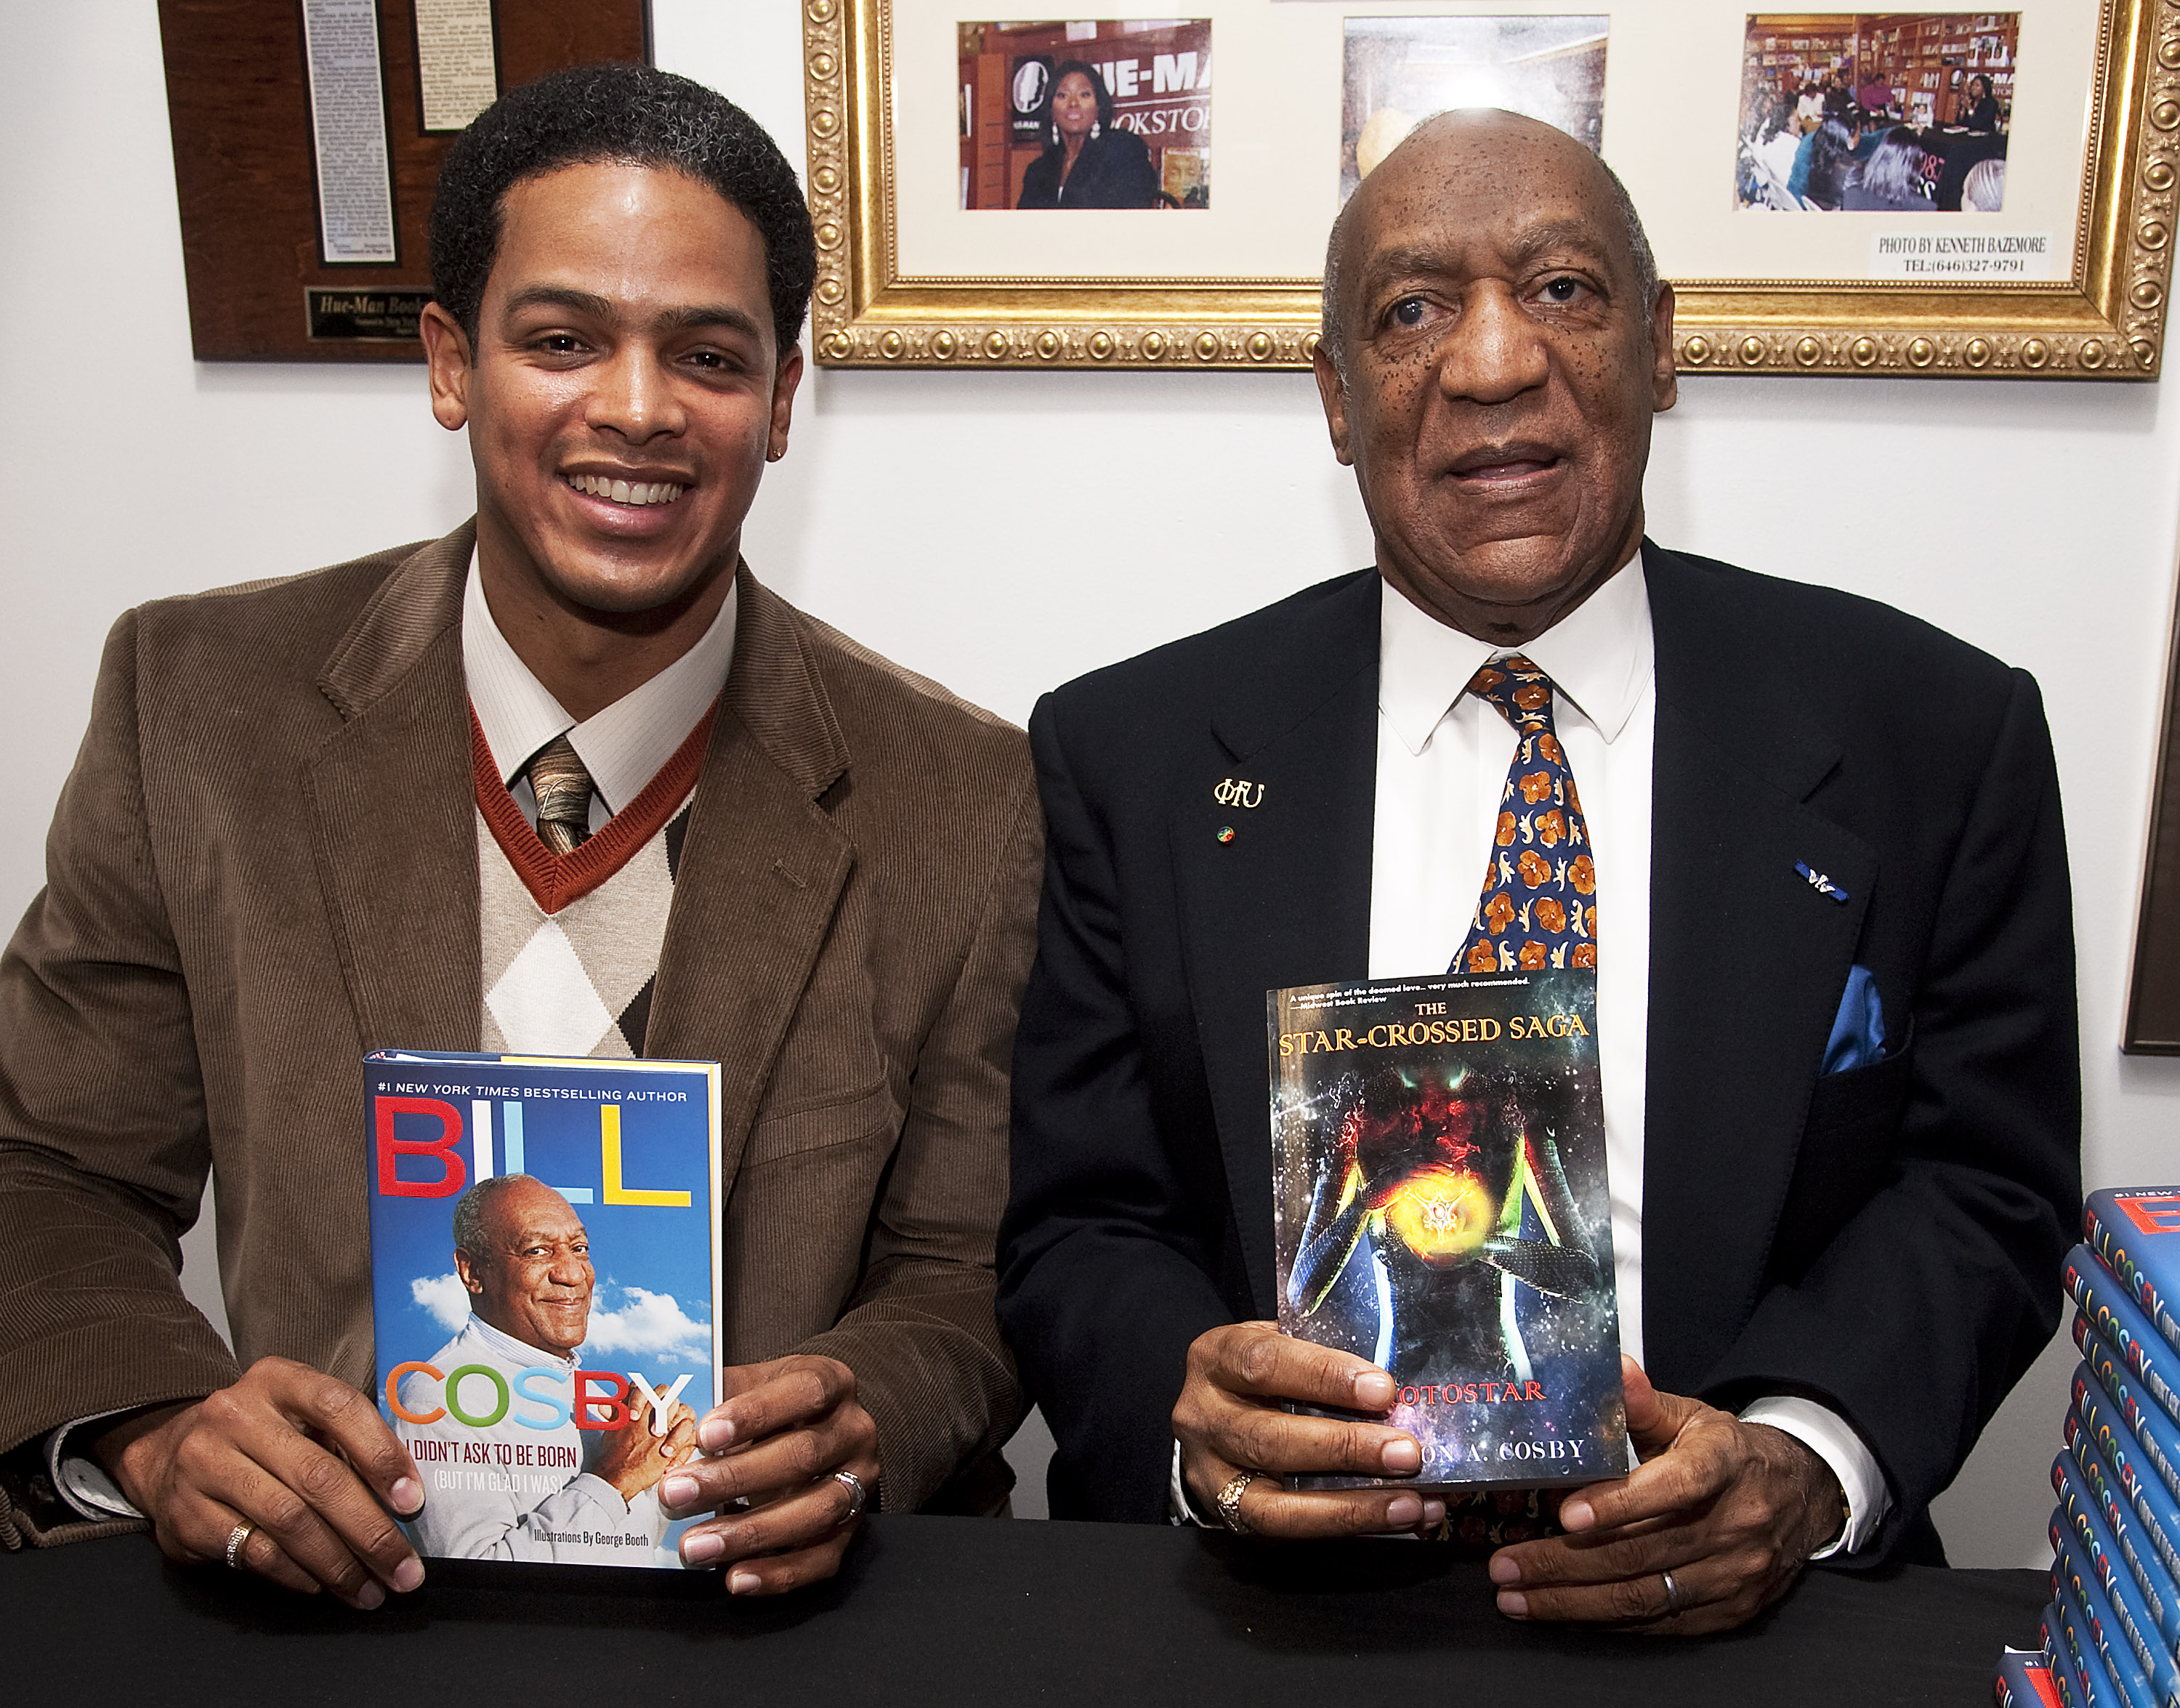 Braxton A. Cosby promotes his book "The Star-Crossed Saga Prostar" while his uncle Bill Cosby promotes "I Didn't Ask To Be Born: (But I'm Glad I Was)" at Hue-Man Bookstore &amp; Cafe on Jan. 18, 2012 in New York,.